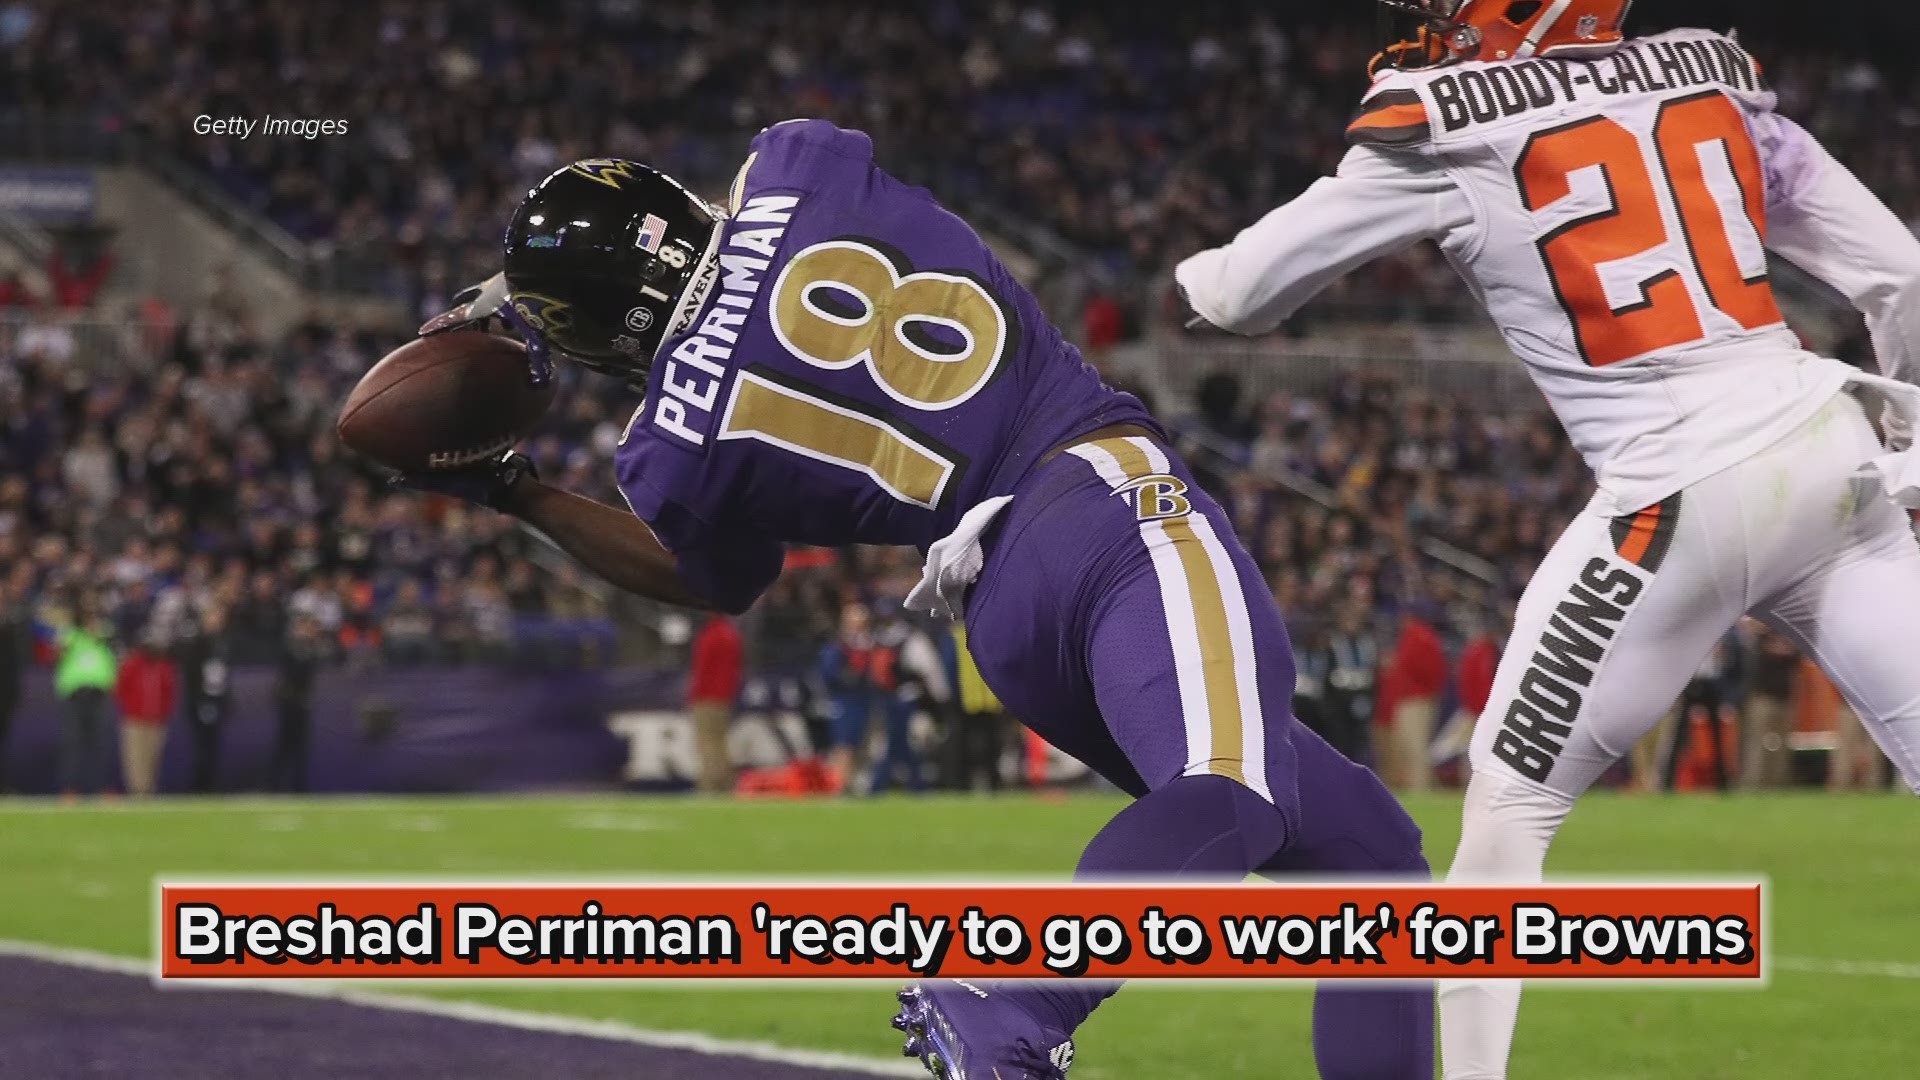 Breshad Perriman 'ready to go to work' for Cleveland Browns